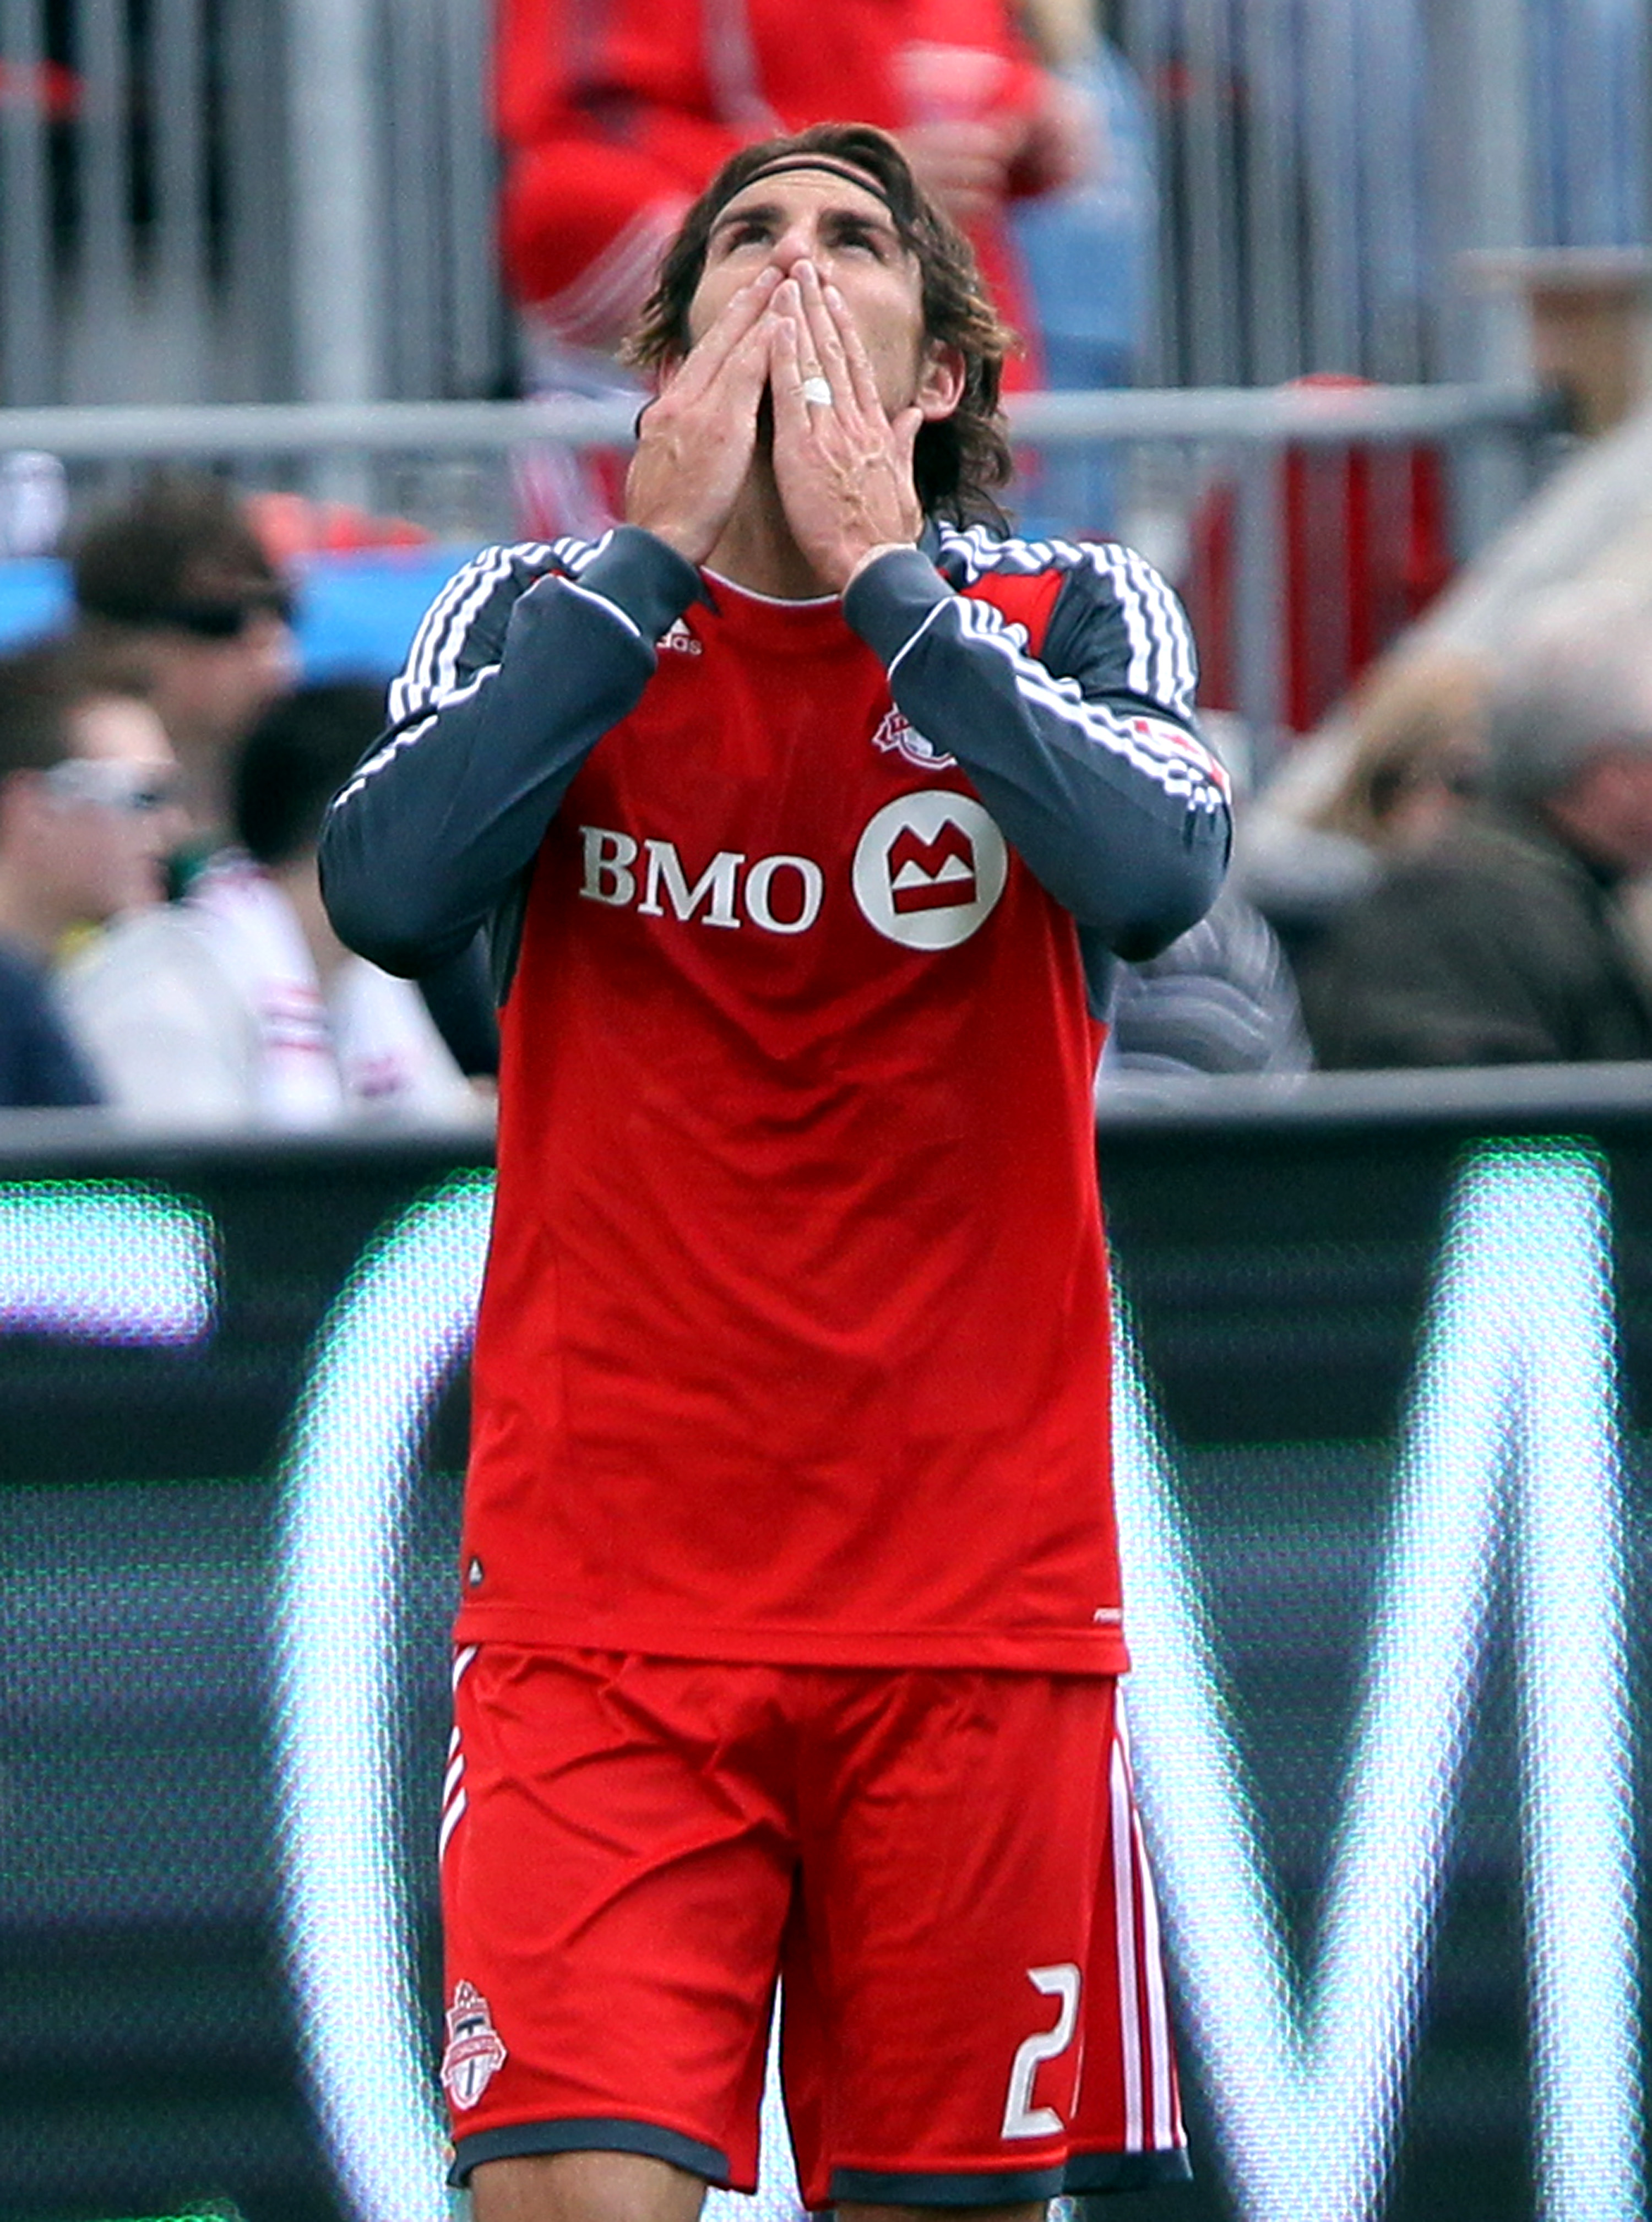 TORONTO, CANADA - APRIL 2: Alan Gordon #21 of Toronto FC celebrates goal against Chivas USA during MLS action at BMO Field April 2, 2011 in Toronto, Ontario, Canada. (Photo by Abelimages/Getty Images)